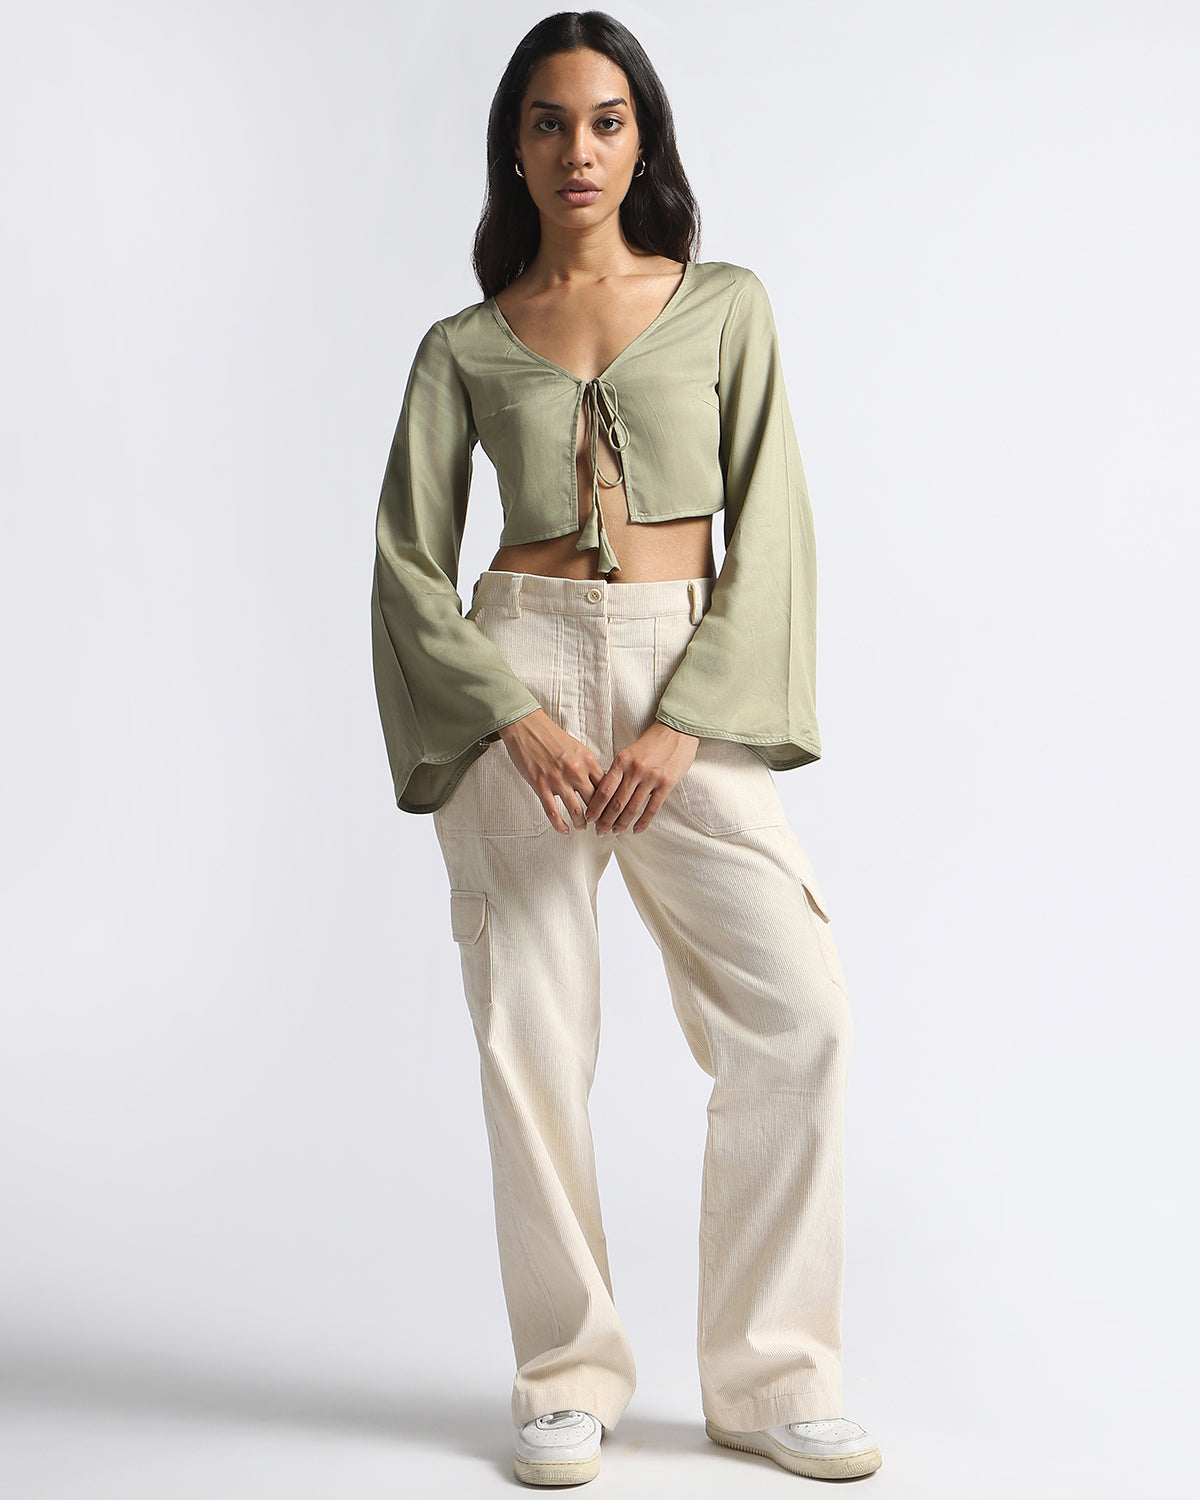 Conscious Bell Sleeves Tie-Up Top - Light Olive Green